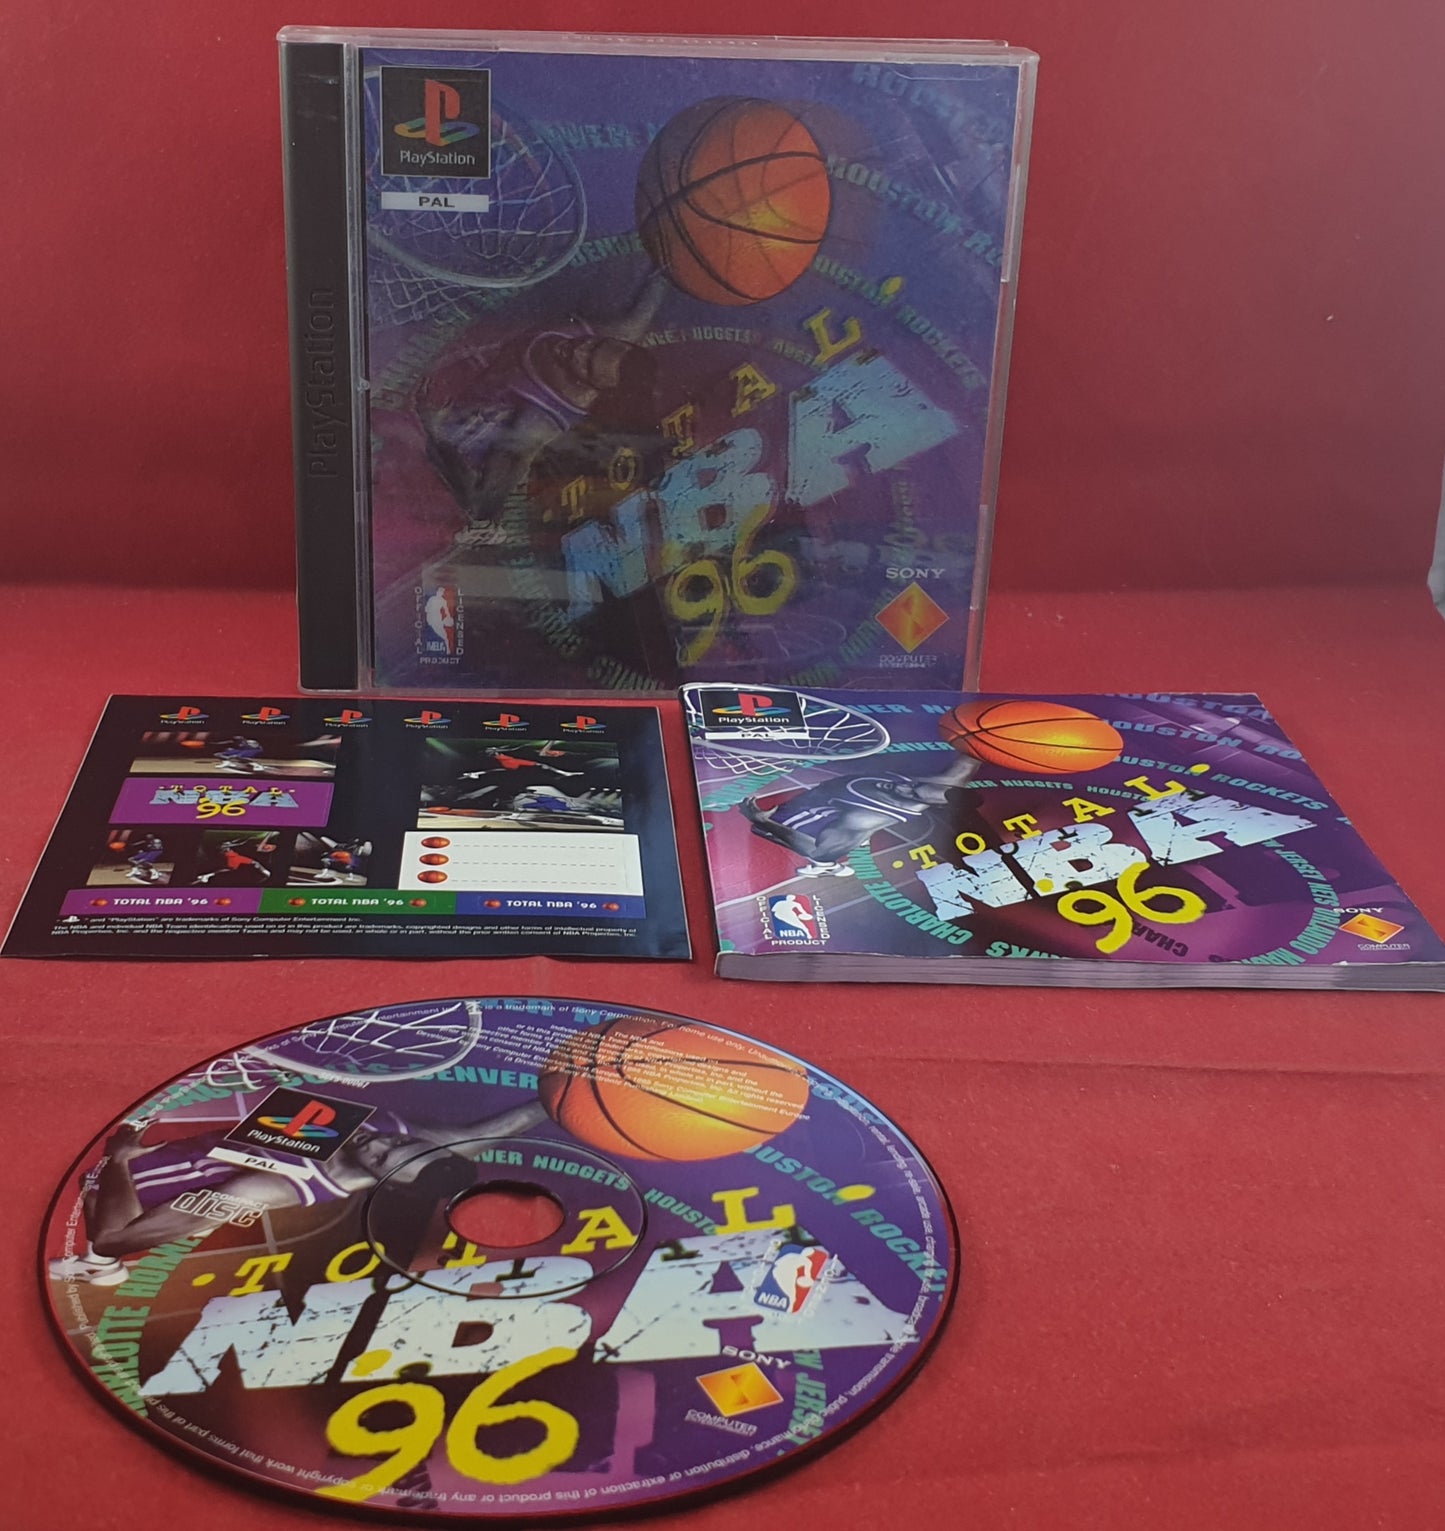 Total NBA 96 AKA NBA ShootOut with RARE Holographic Inlay and Stickers Sony Playstation 1 (PS1) Game